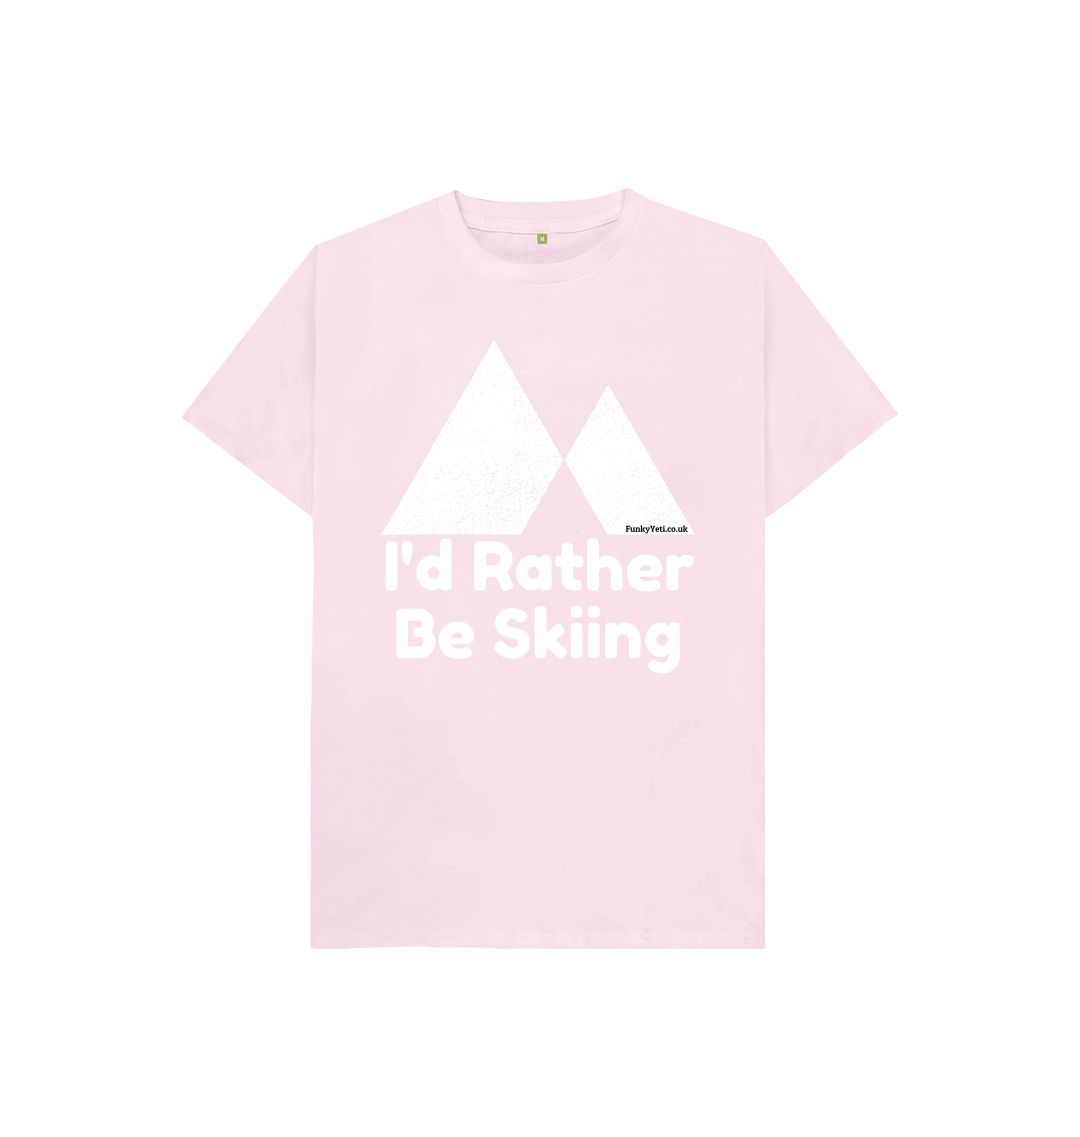 Pink Funky Yeti Kids Tee - I'd Rather Be Skiing